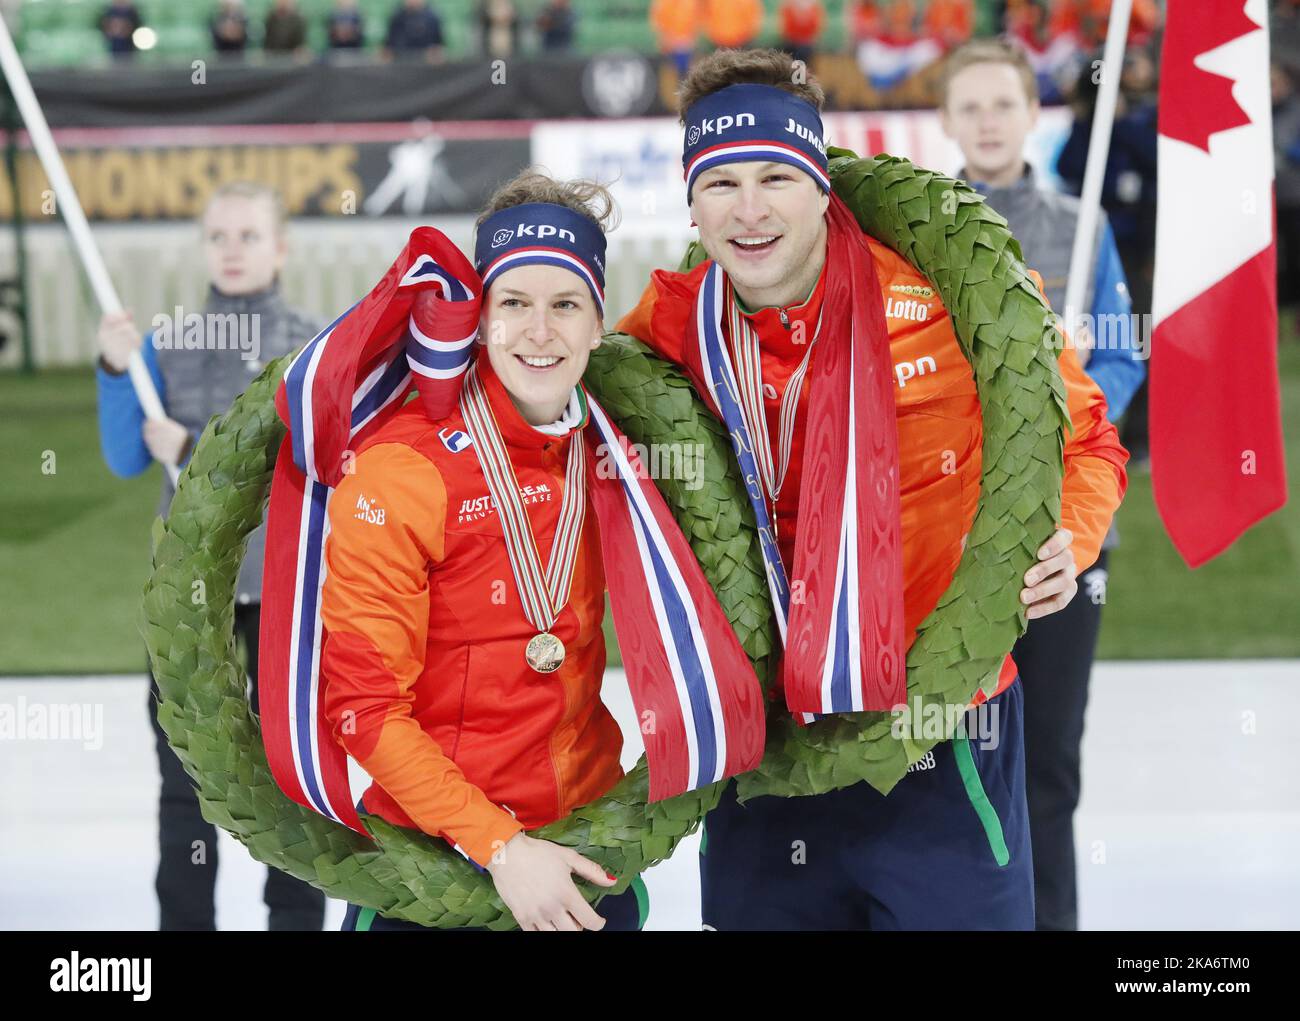 Iren Wüst and Sven Kramer from the Netherlands won the allround title at the ISU World Allround Speed Skating Championships at Vikingskipet Olympic Hall in Hamar, Saturday, March 5, 2017. Photo: Terje Bendiksby / NTB scanpix Stock Photo